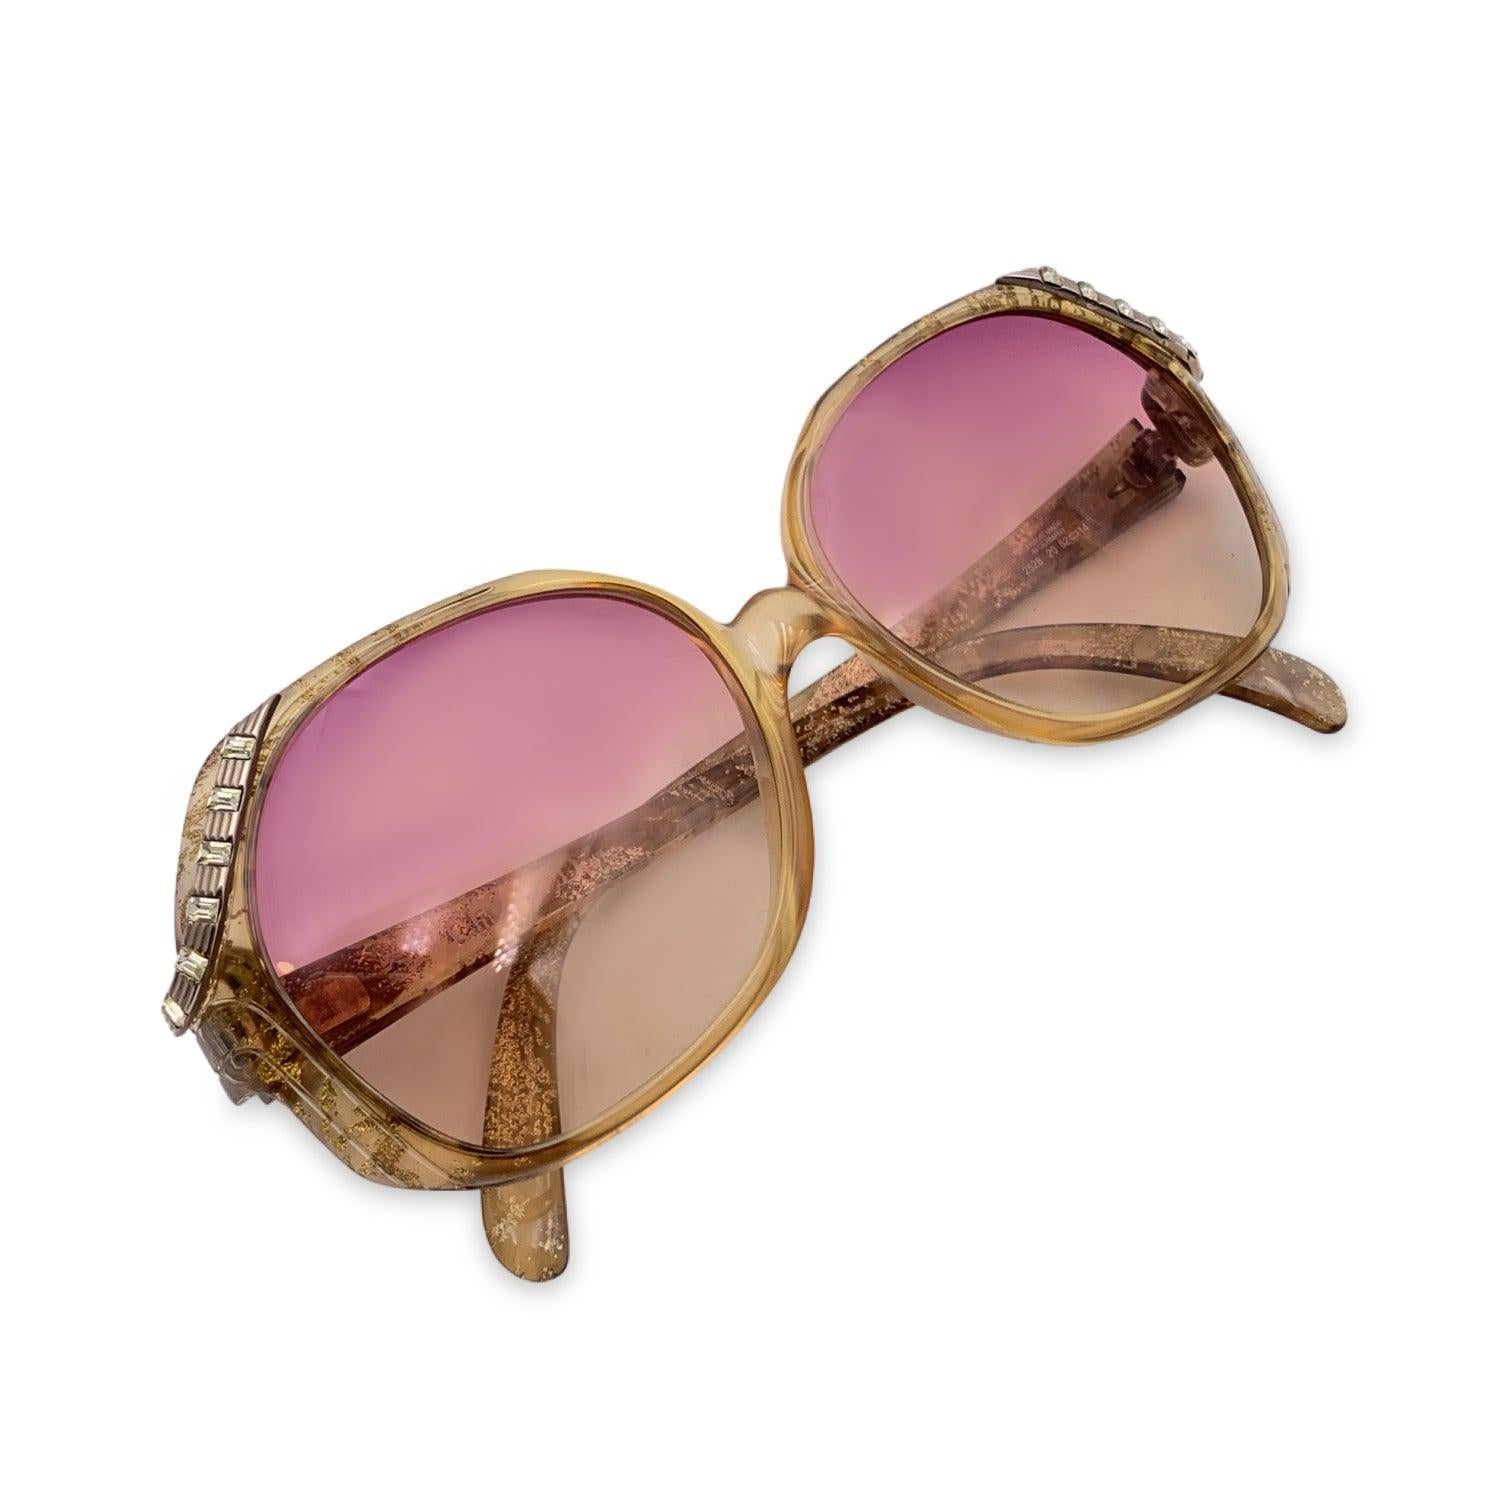 Vintage Christian Dior Women Sunglasses, Mod. 2528 20 Optyl. Size: 52/14 125mm. Beige acetate square frame with gold details on the upper side of the frame. CD logo on temples . 100% Total UVA/UVB protection. Pink gradient lenses. Details MATERIAL: